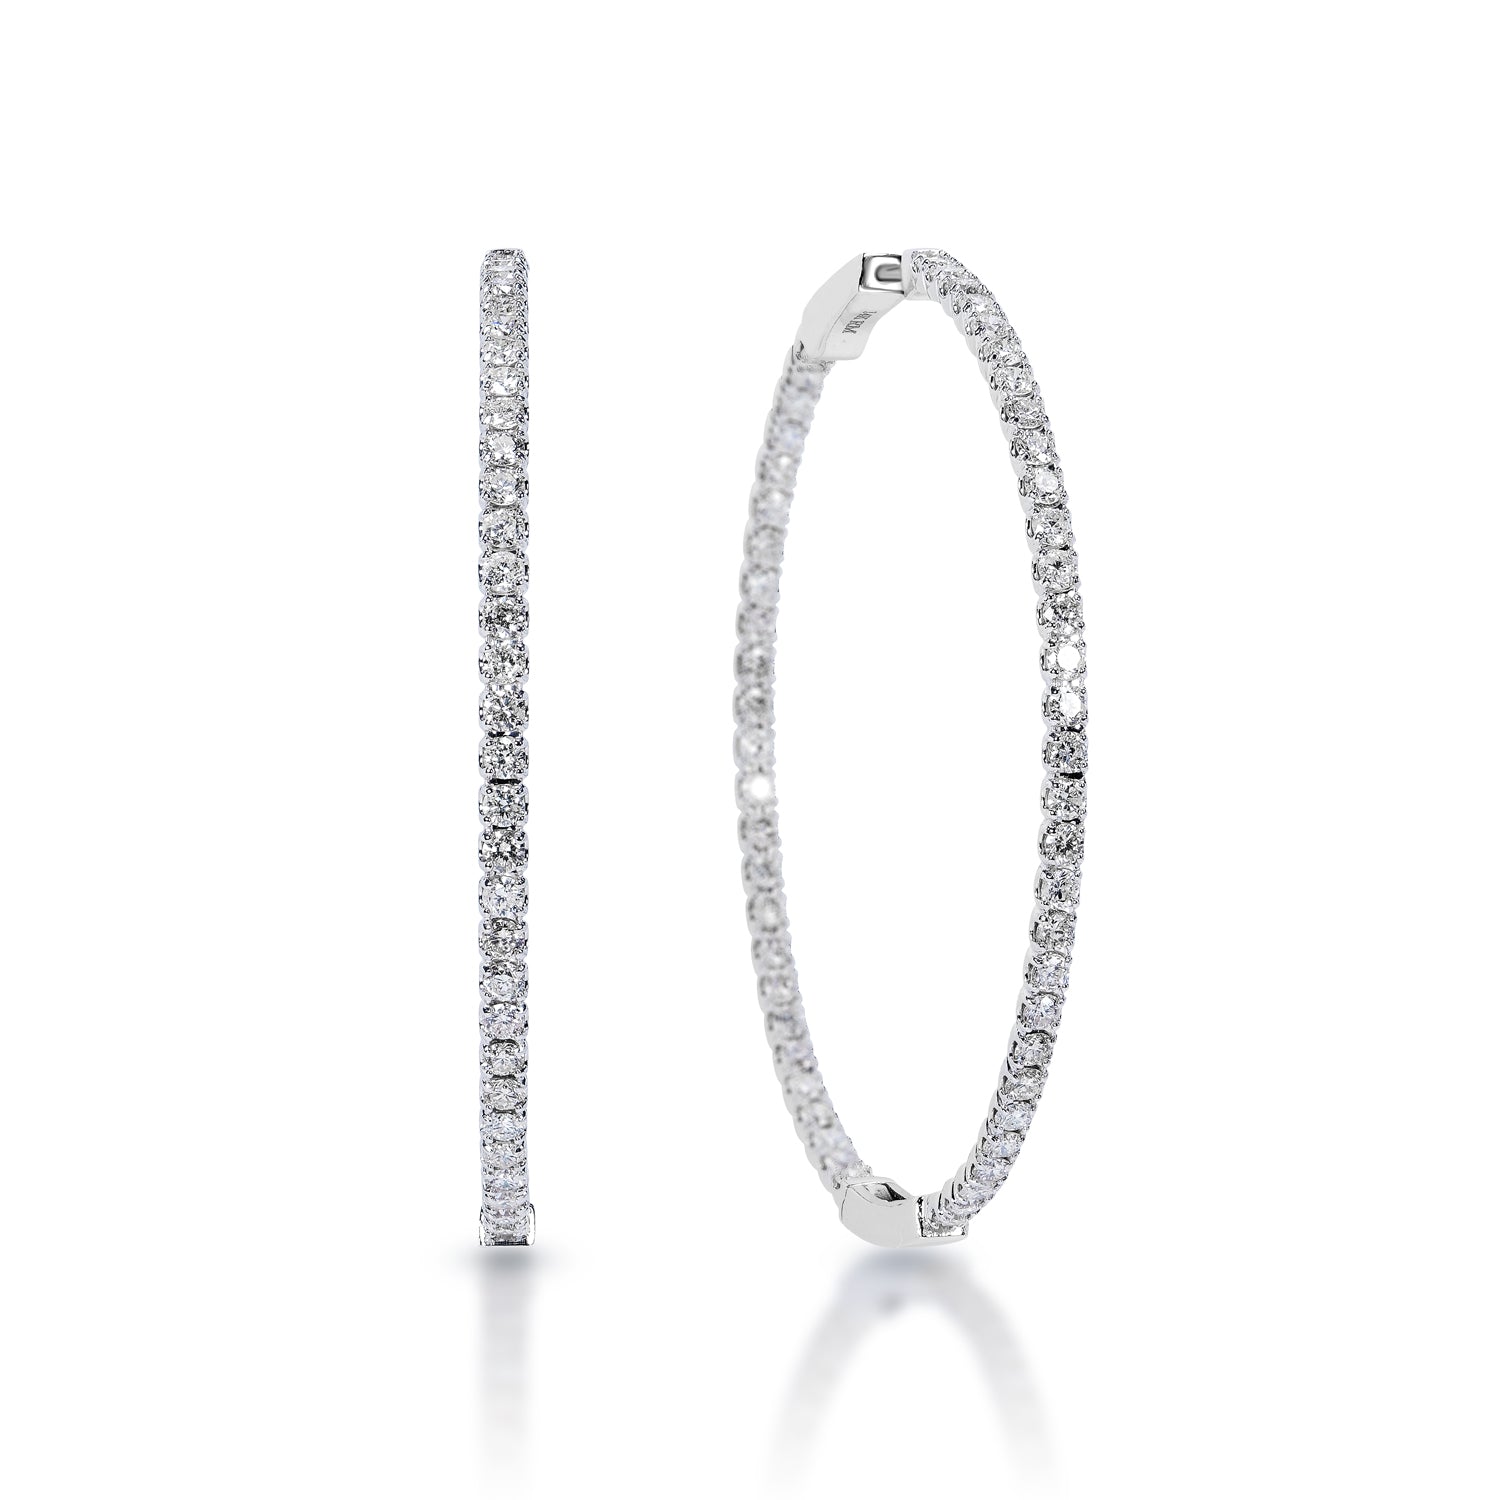 Jenna 3.25 Carat Round Brilliant Diamond Hoop Earrings in 14k White Gold Front and Side View